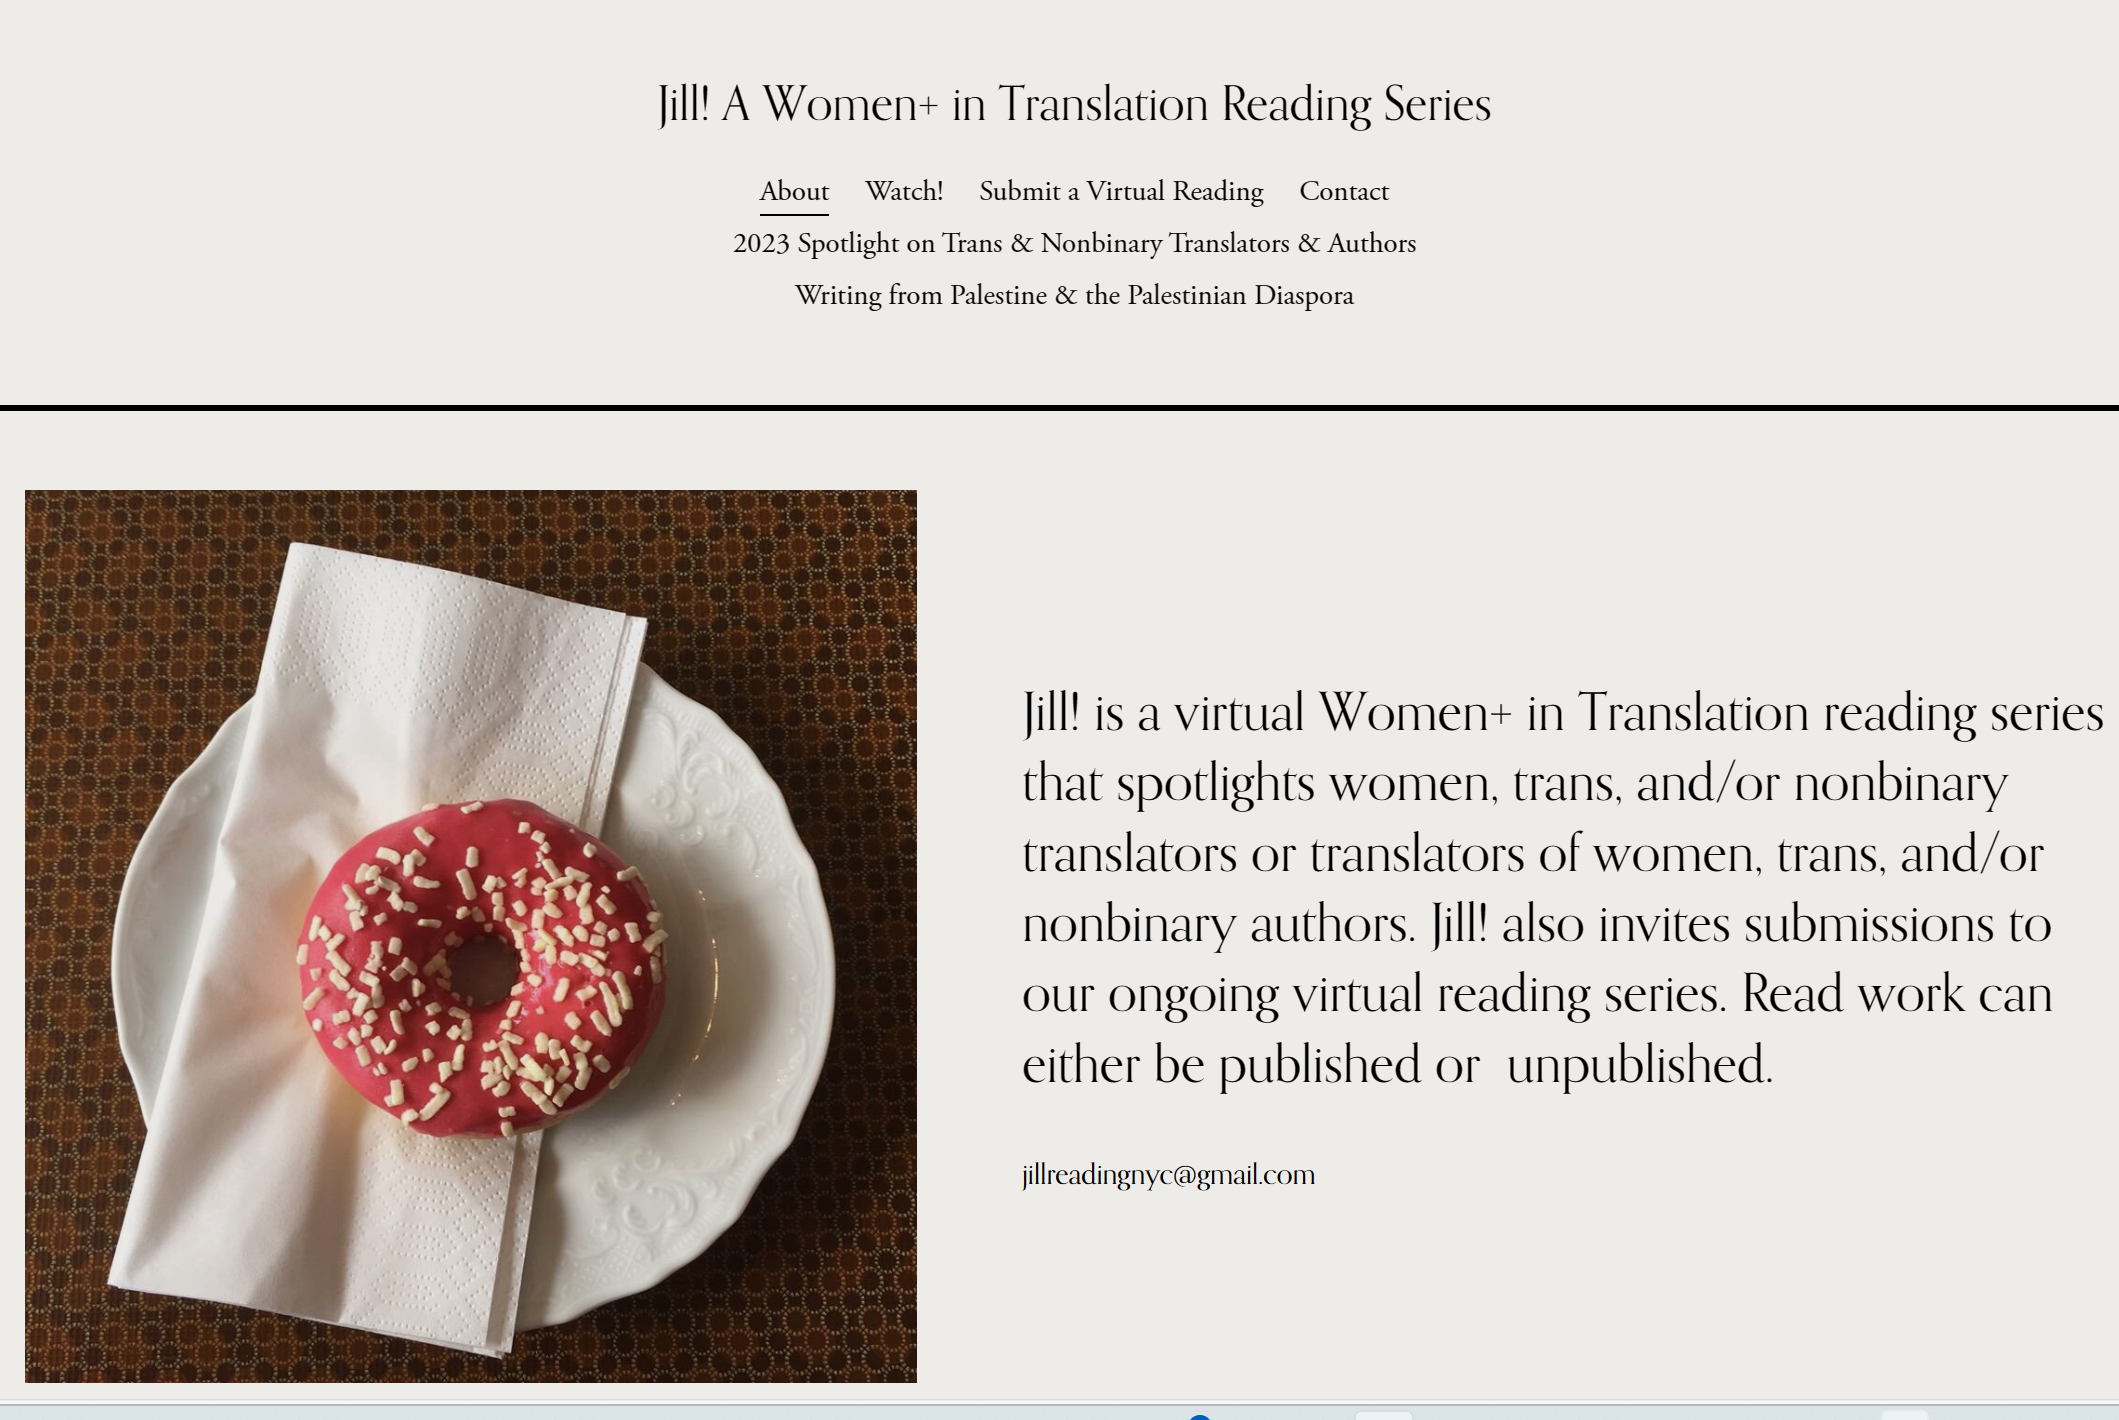 Reading of The Tree and the Vine for Jill! A Women+ in Translation Reading Series | Kristen Gehrman Language Services